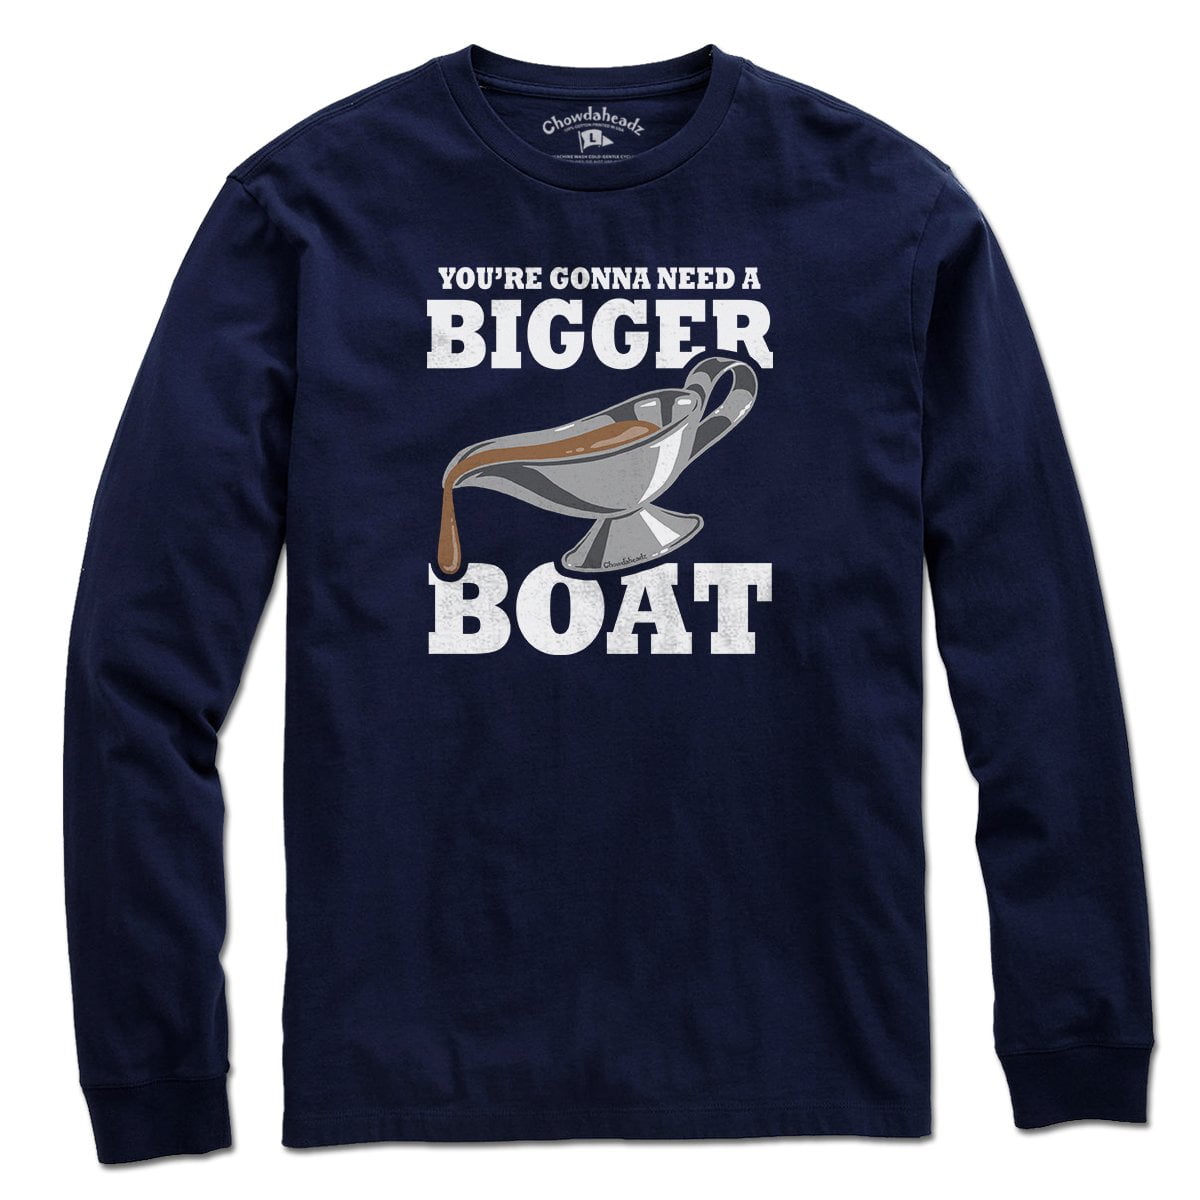 You're Gonna Need A Bigger Boat T-Shirt - Chowdaheadz